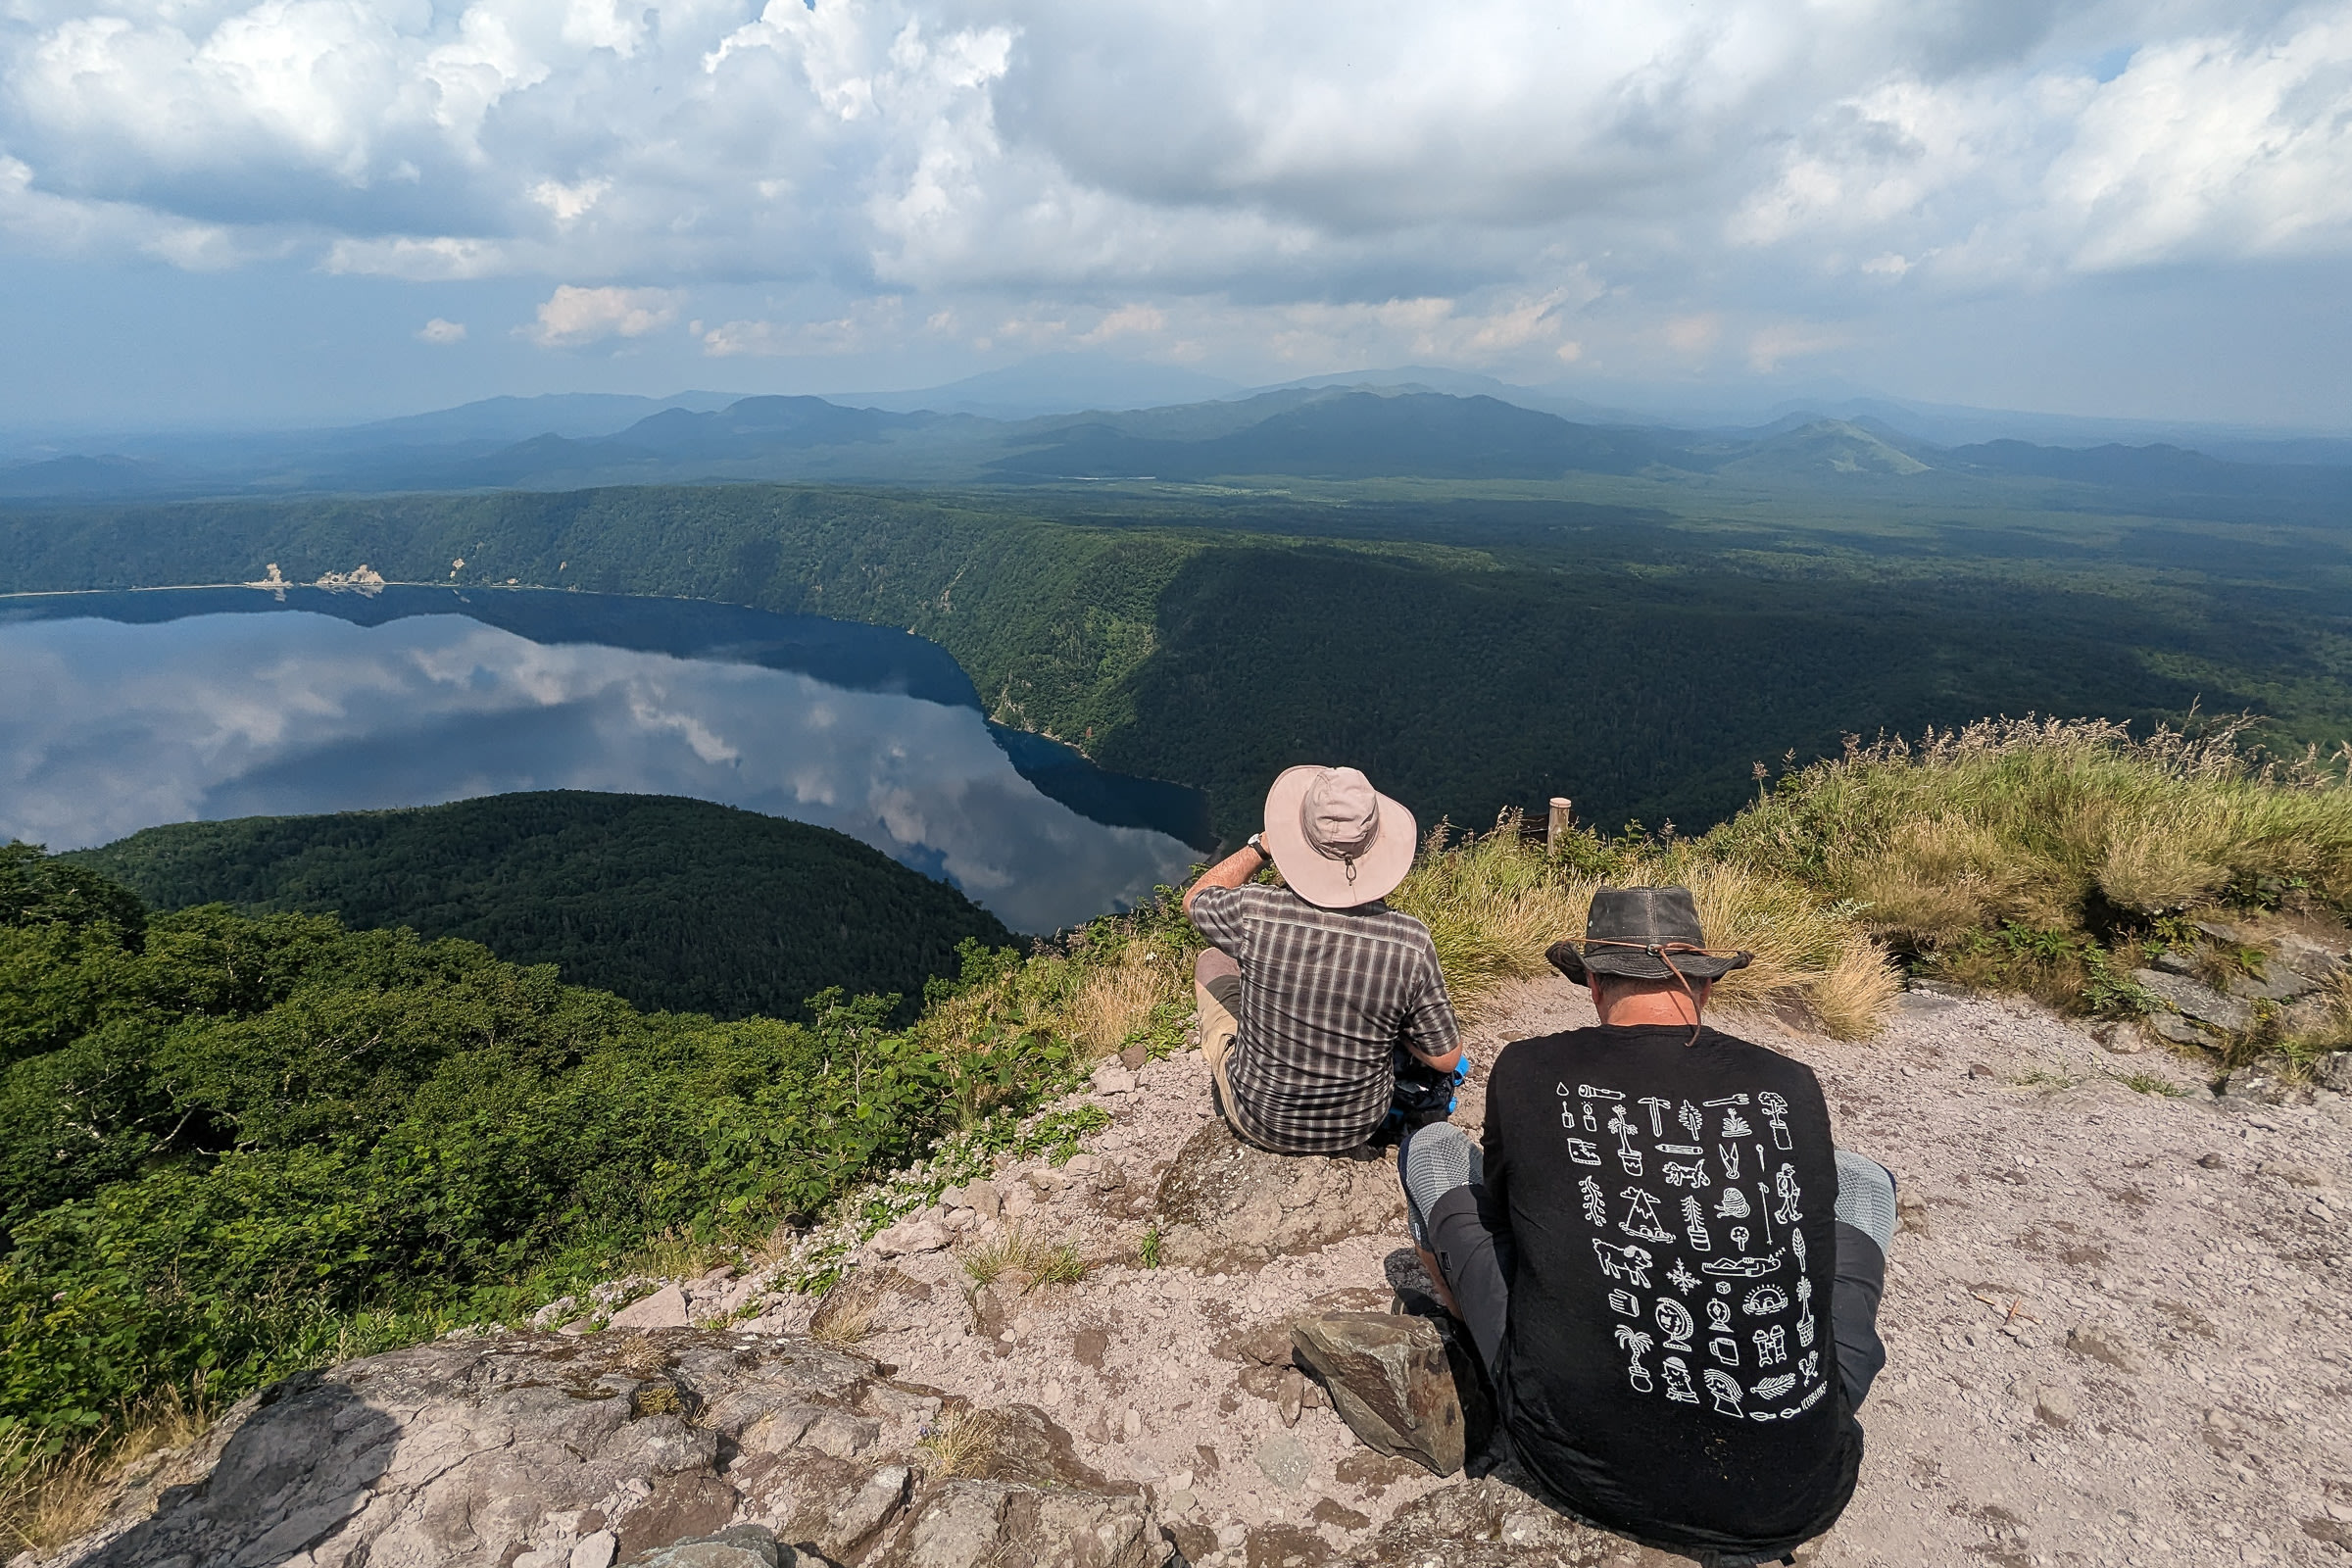 A group of hikers take a break on a mountain, looking out over a partial view of Lake Mashu. It is a still day and the water's surface is very reflective.